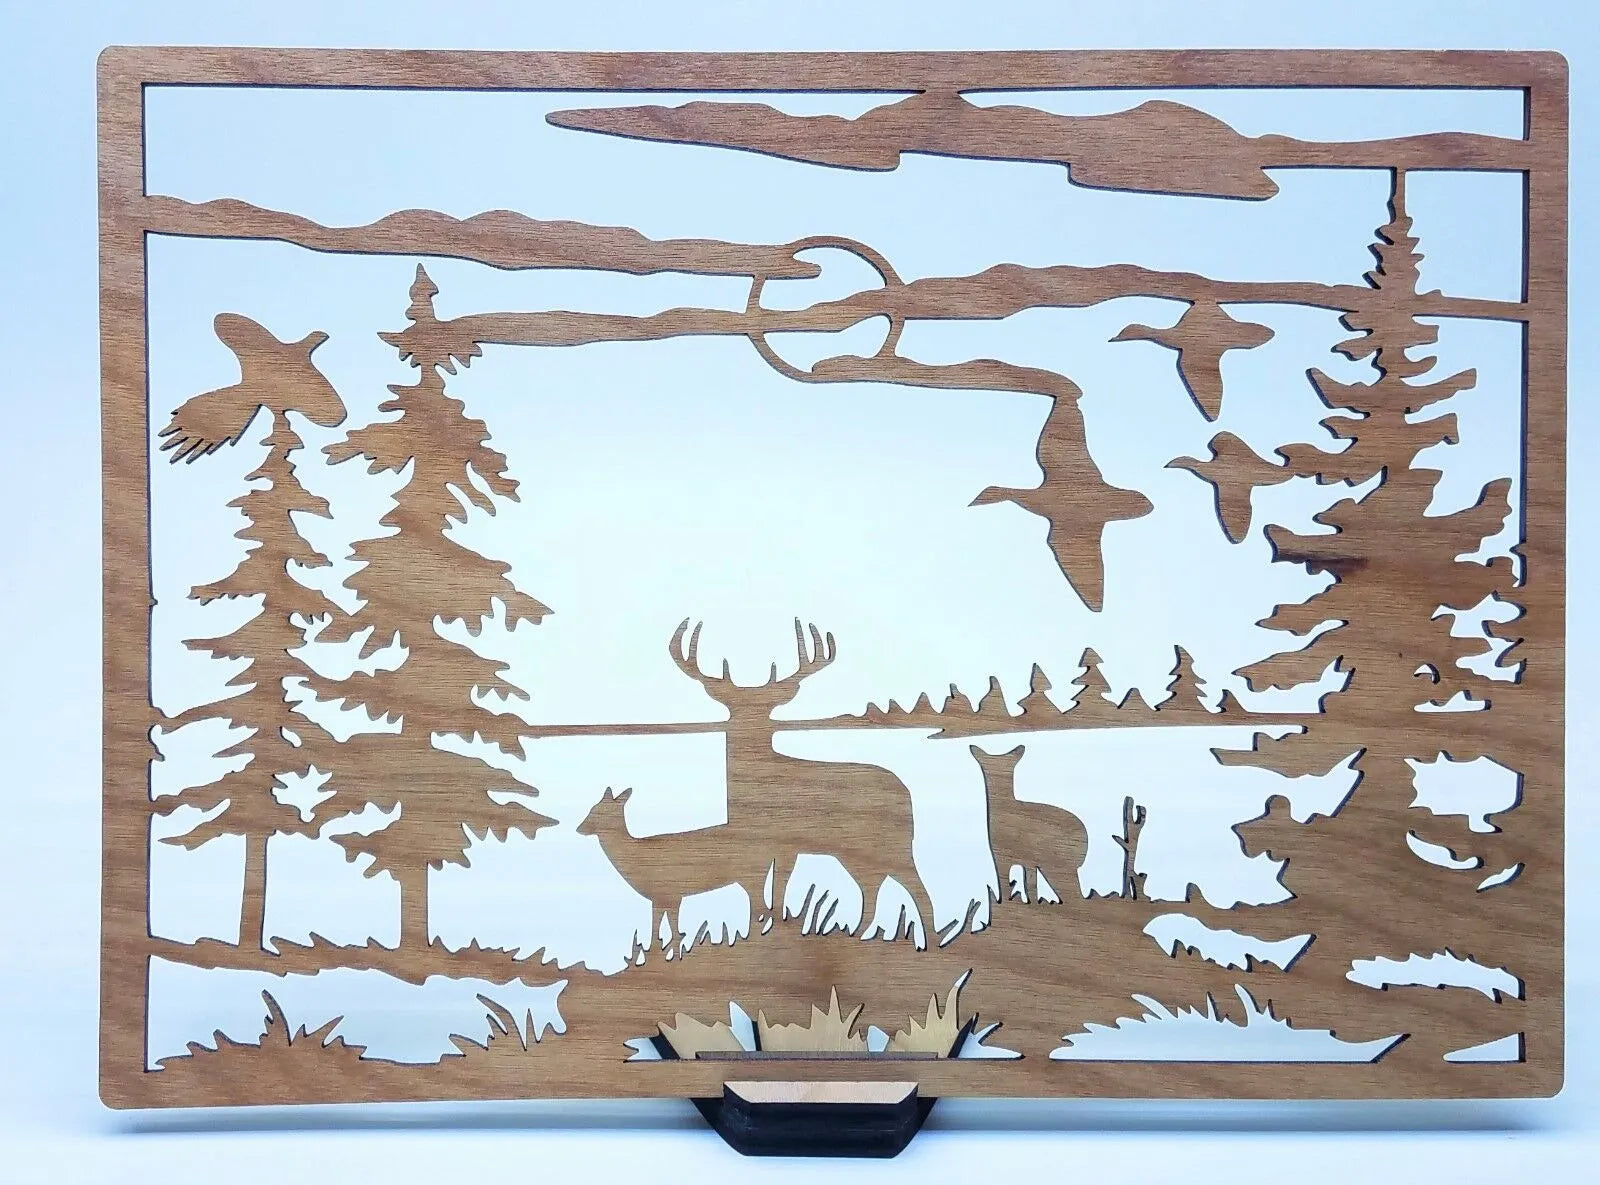 Wooden forest ecosystem image